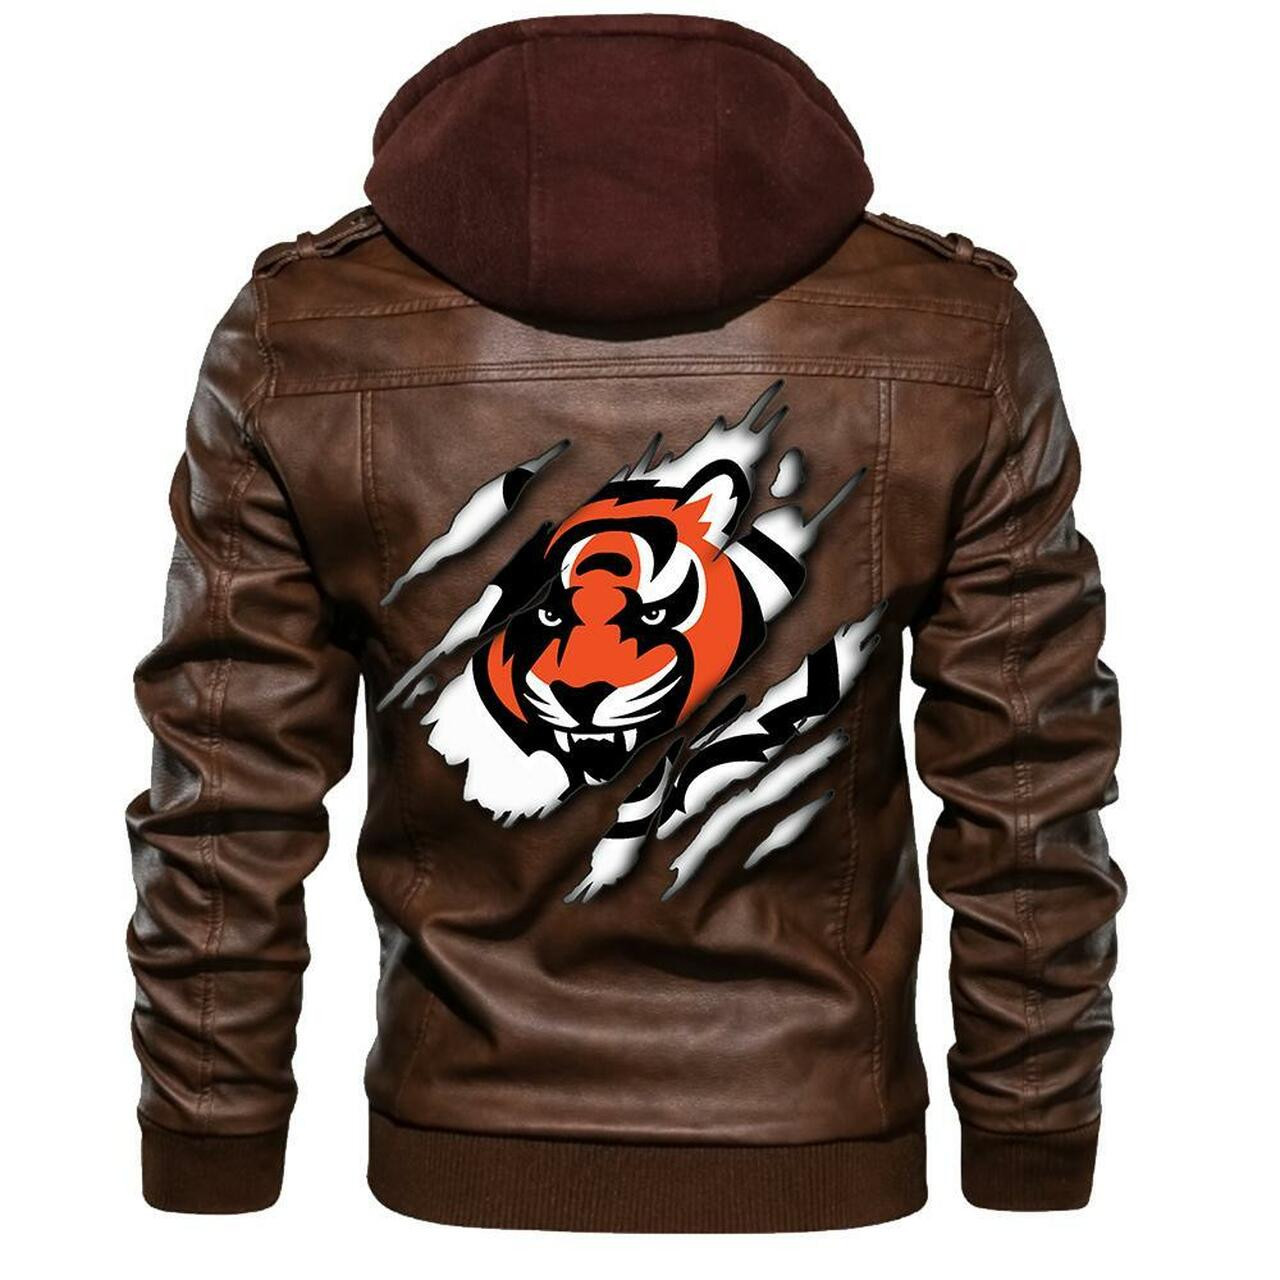 Our store has all of the latest leather jacket 142